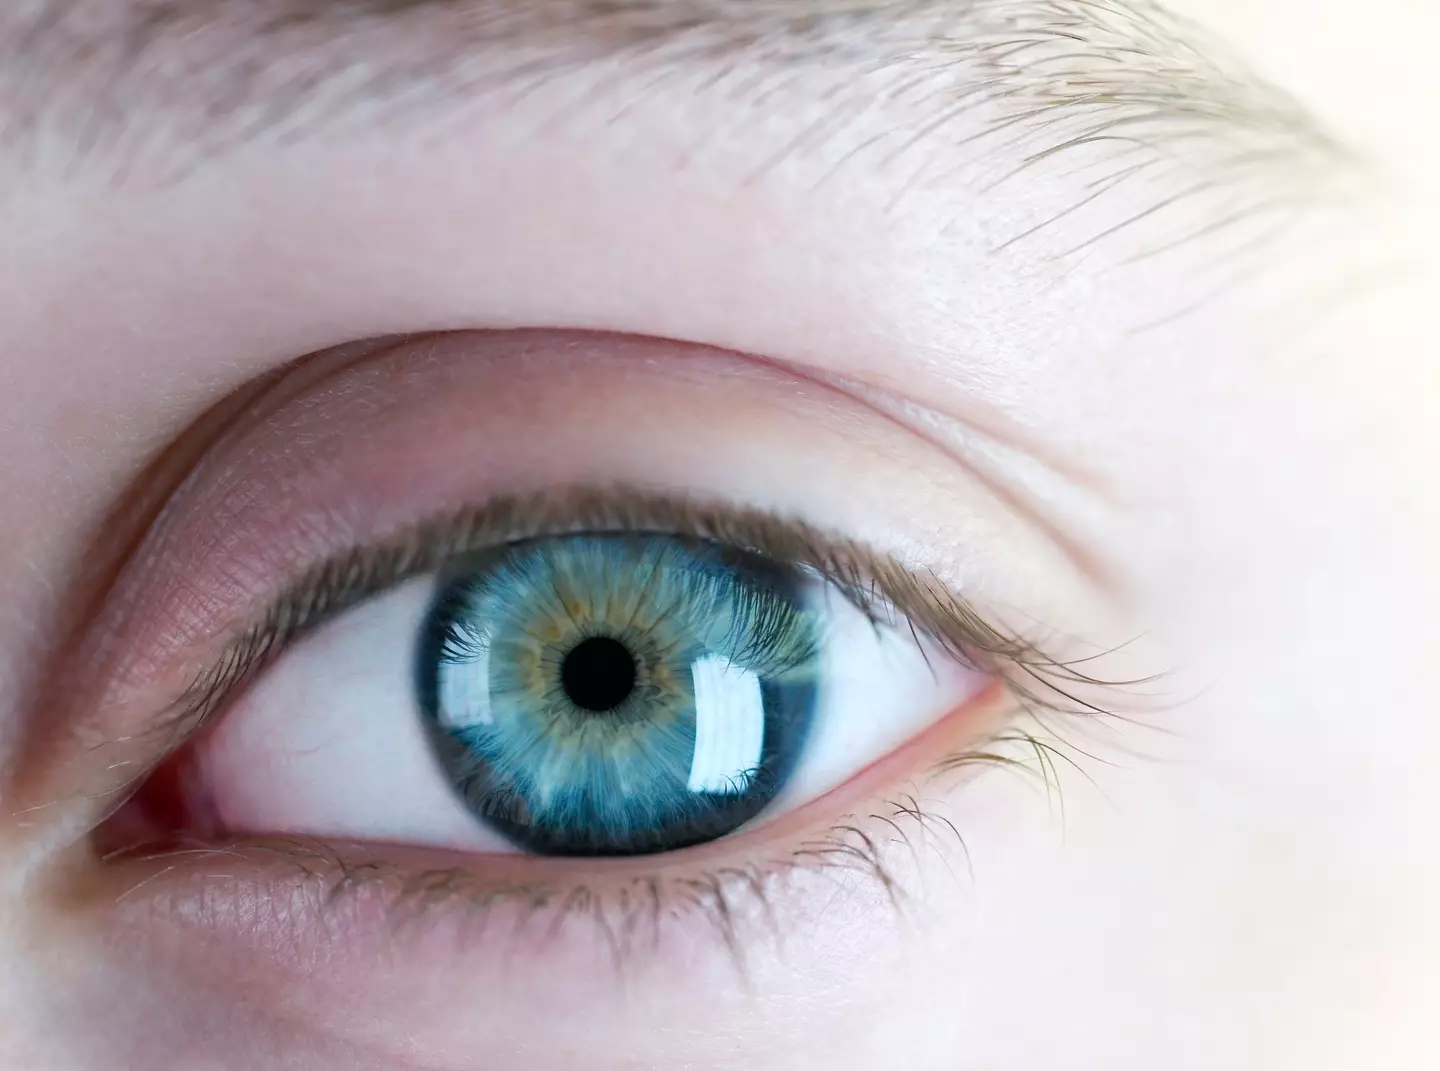 Everyone with blue eyes is apparently descended from the same person.